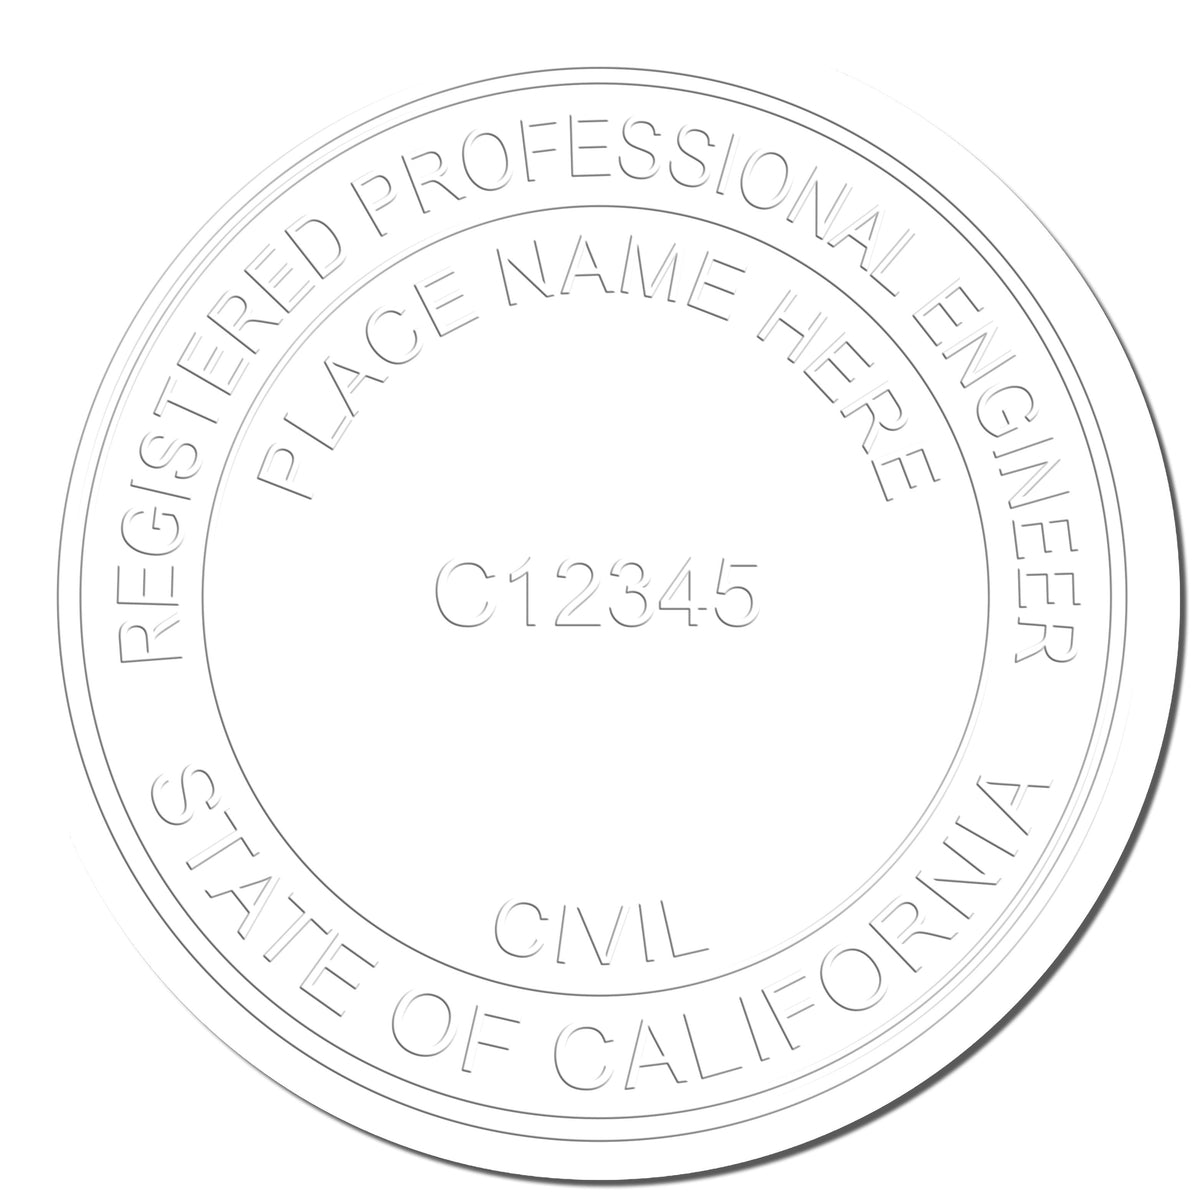 This paper is stamped with a sample imprint of the Gift California Engineer Seal, signifying its quality and reliability.